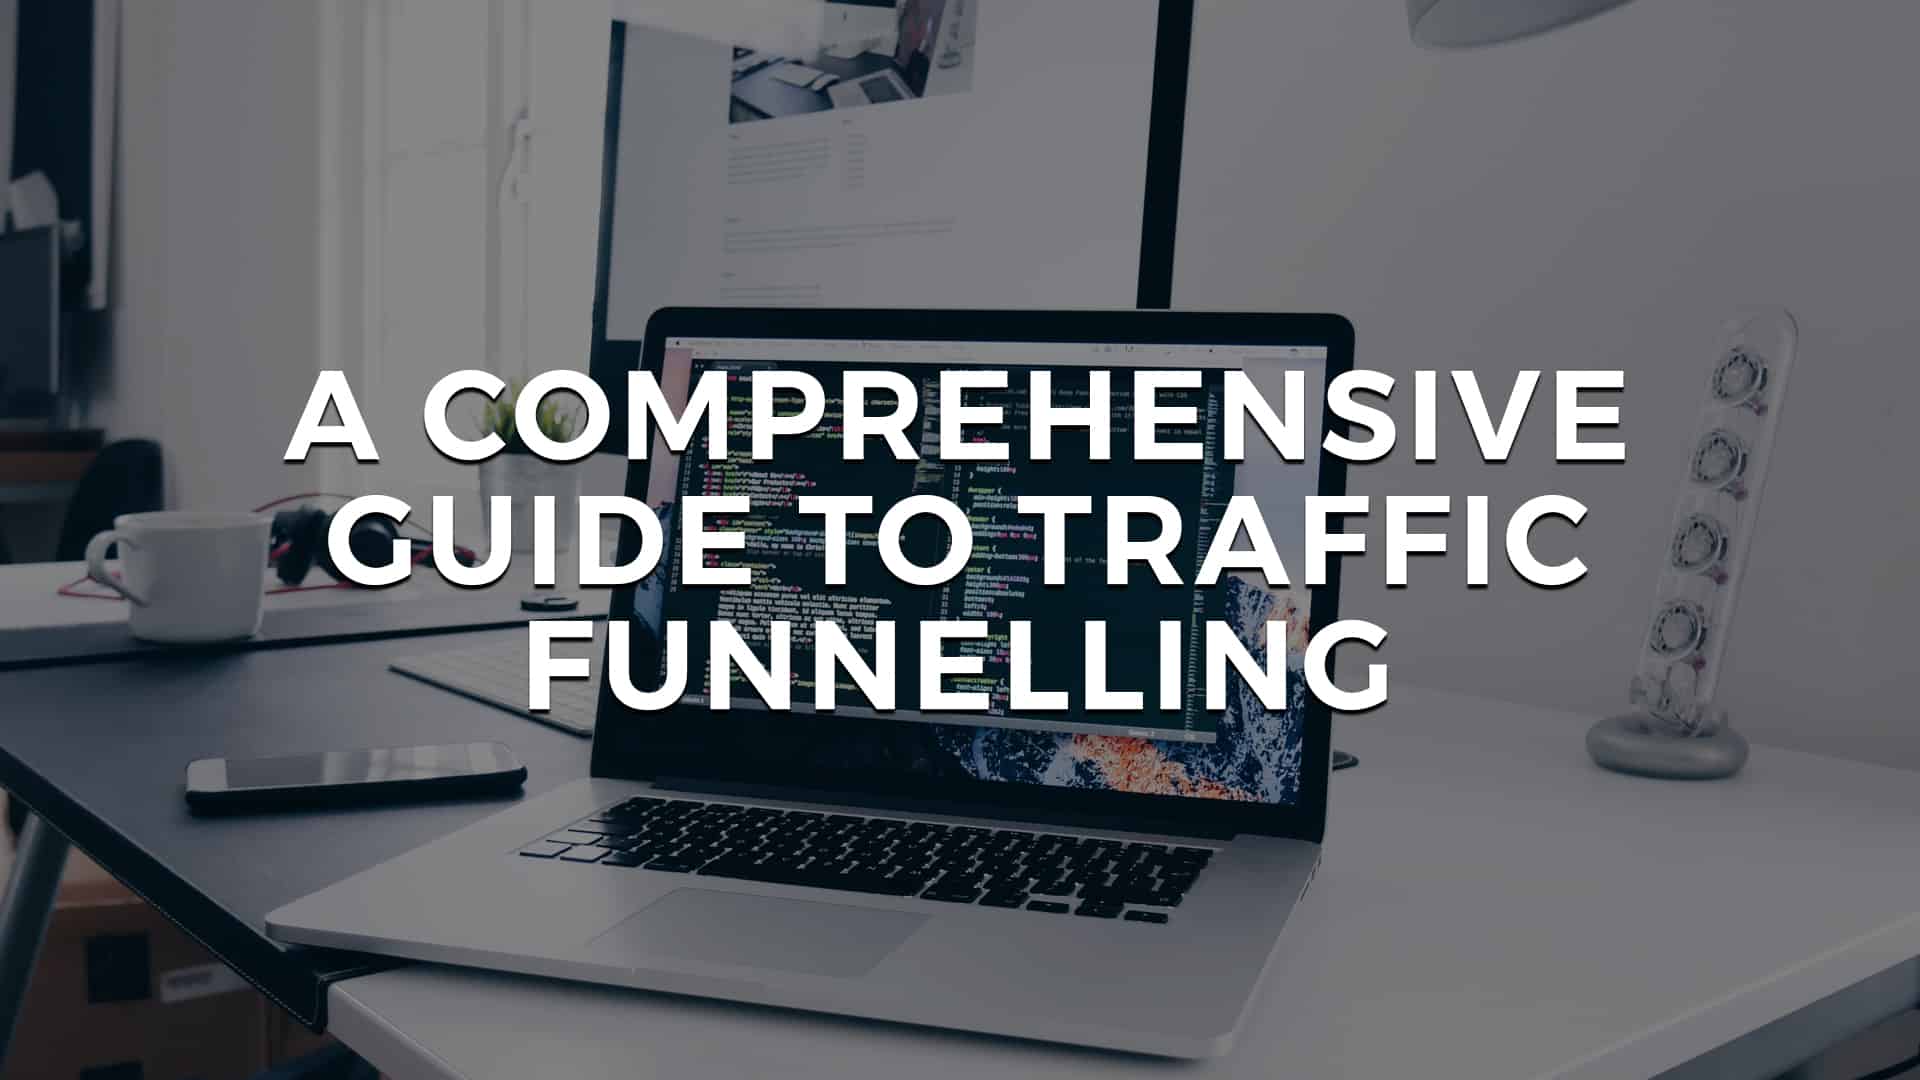 You are currently viewing A Comprehensive Guide to Traffic Funnelling